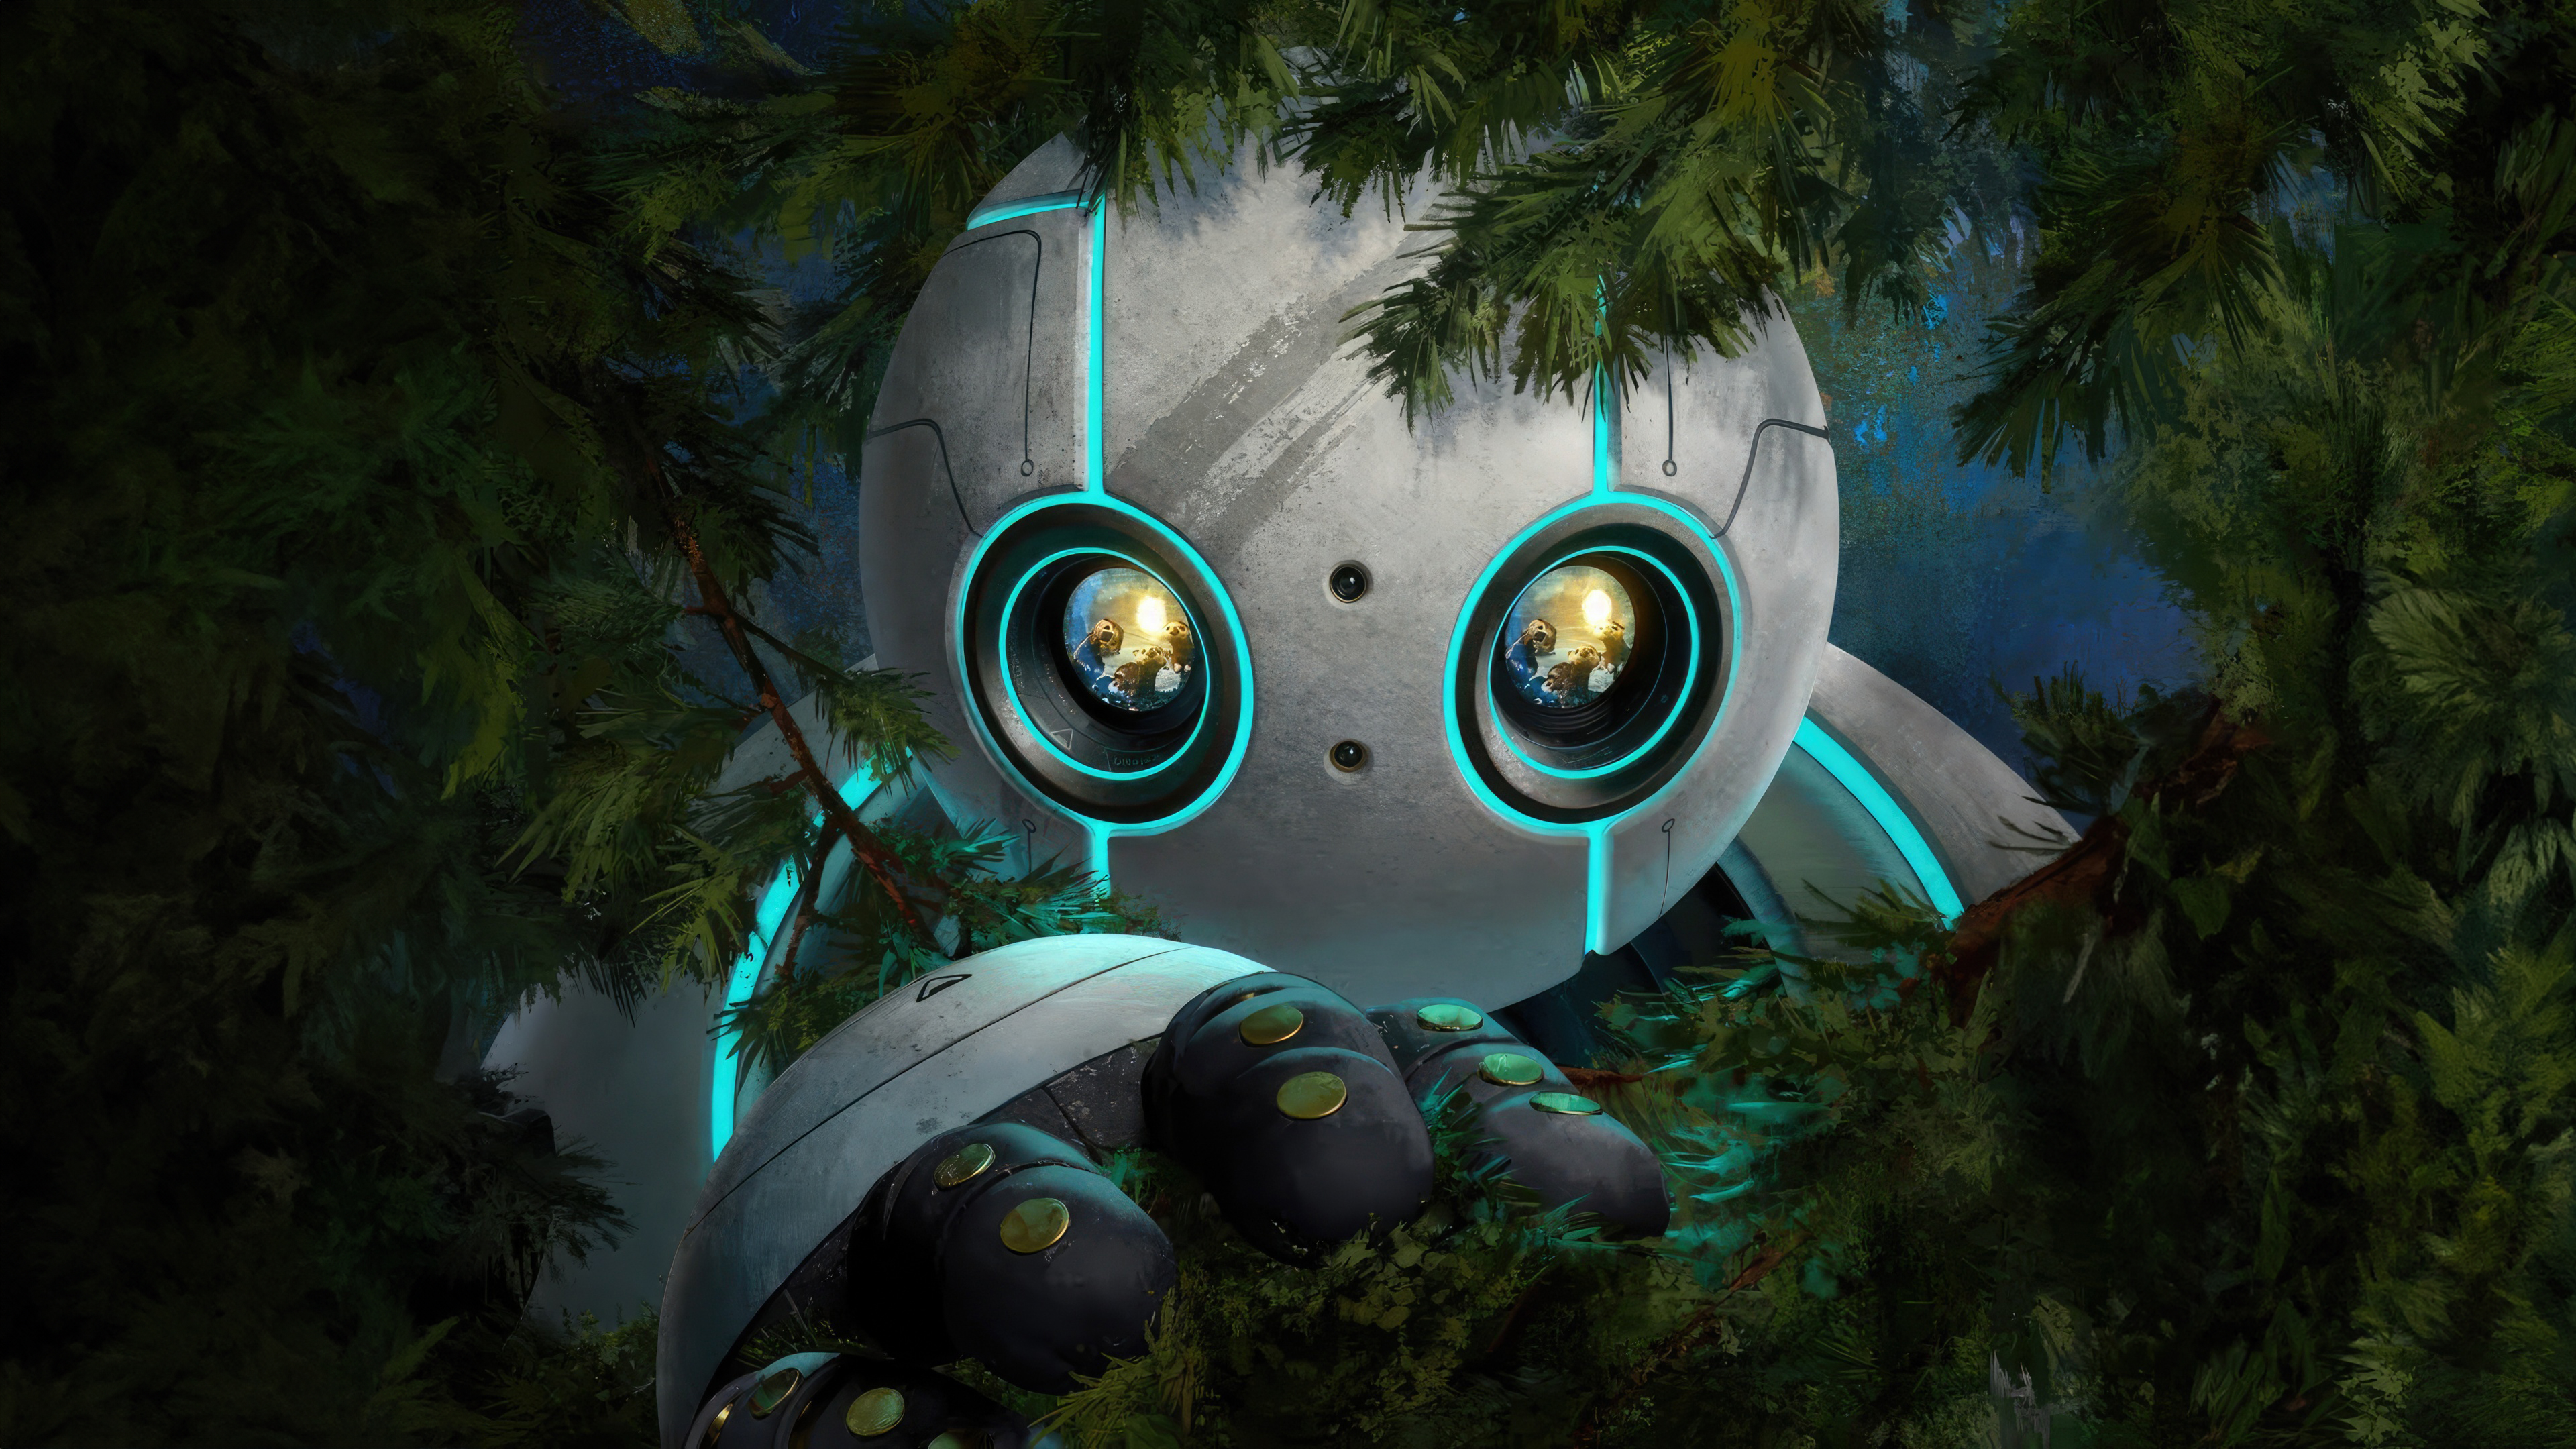 General 3840x2160 The Wild Robot digital art robot movie characters 4K trees nature illustration Dreamworks Universal Pictures closeup looking at viewer blue technology